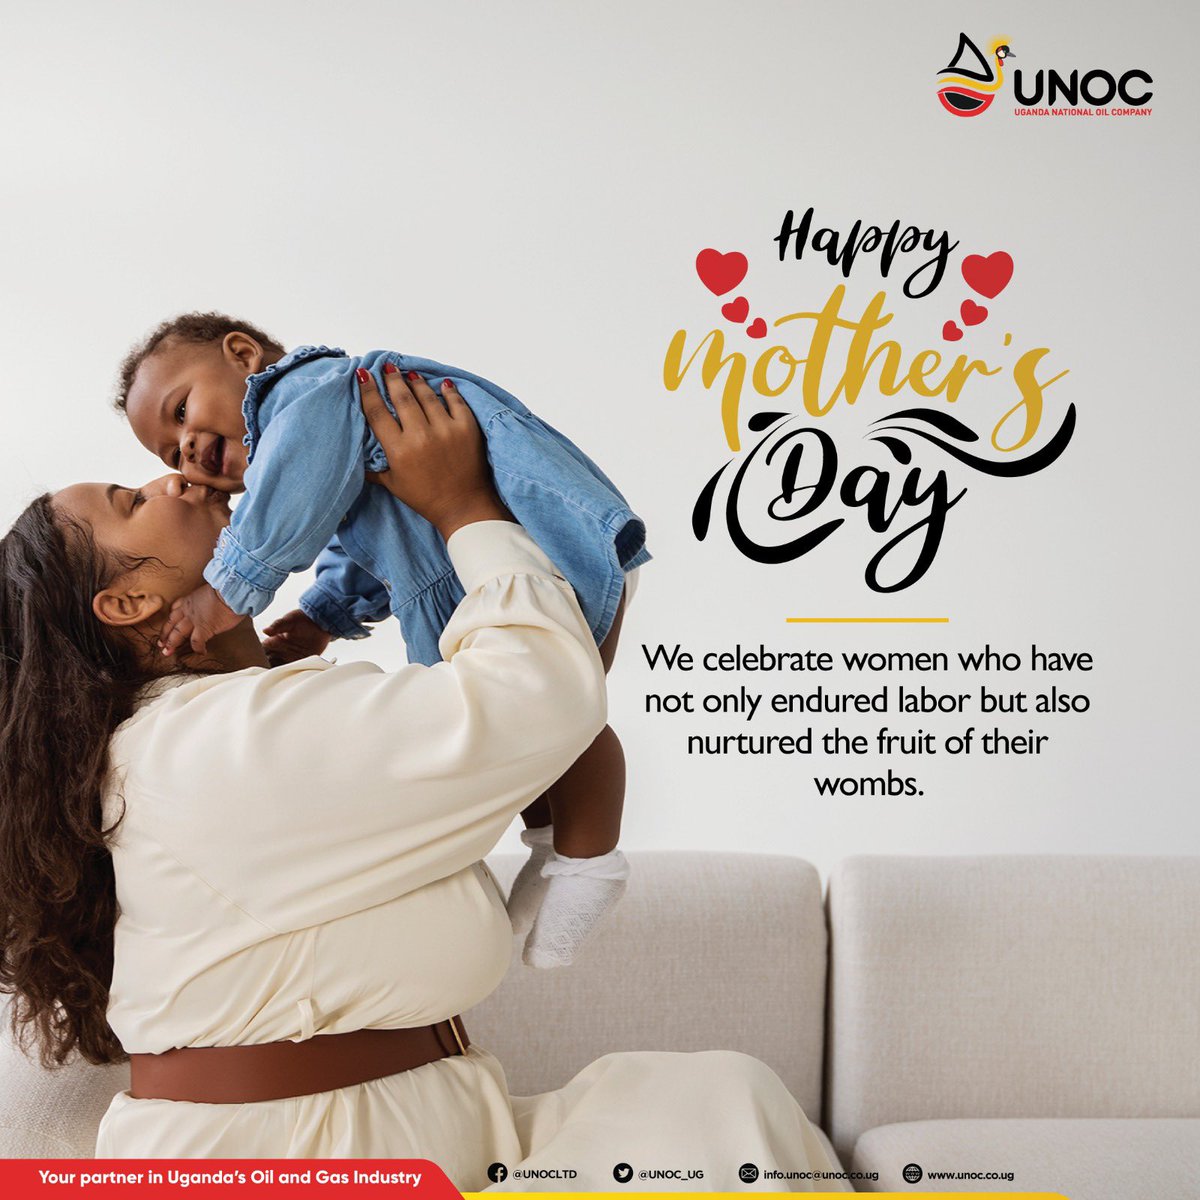 To the women who love unconditionally, here’s to you! #HappyMothersDay